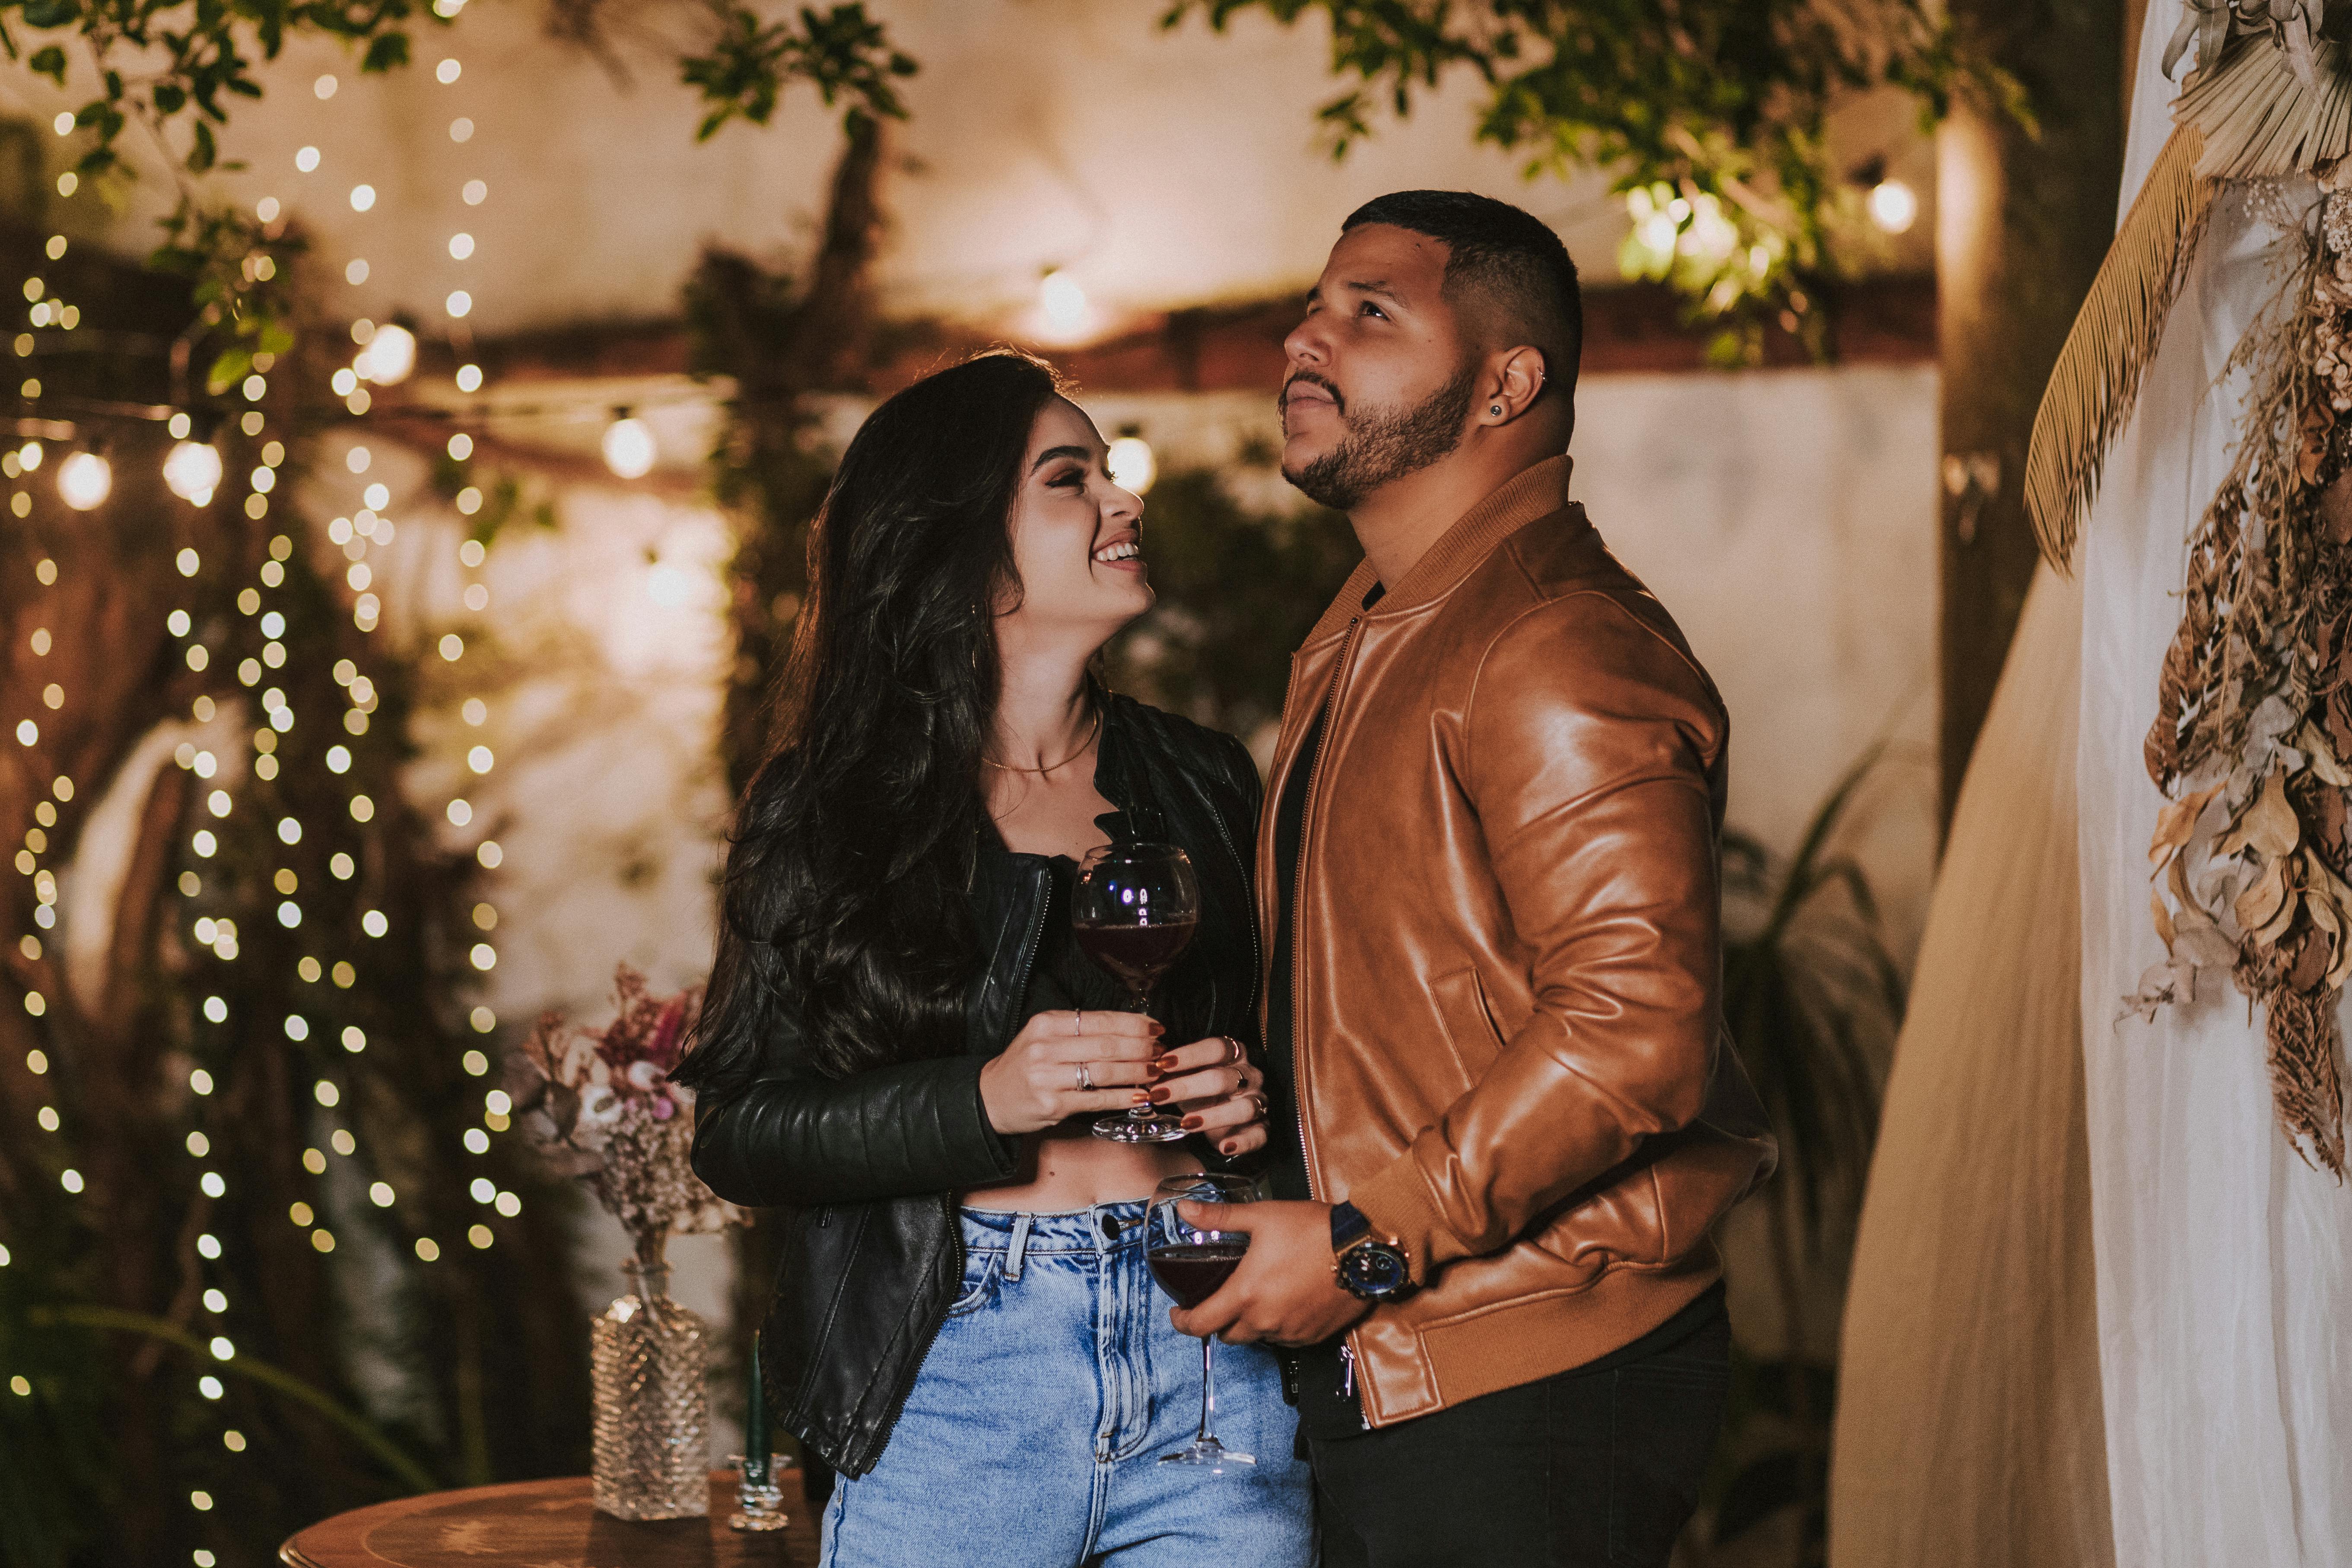 https://images.pexels.com/photos/16956644/pexels-photo-16956644/free-photo-of-couple-standing-close-with-glasses-of-red-wine-in-their-hands.jpeg